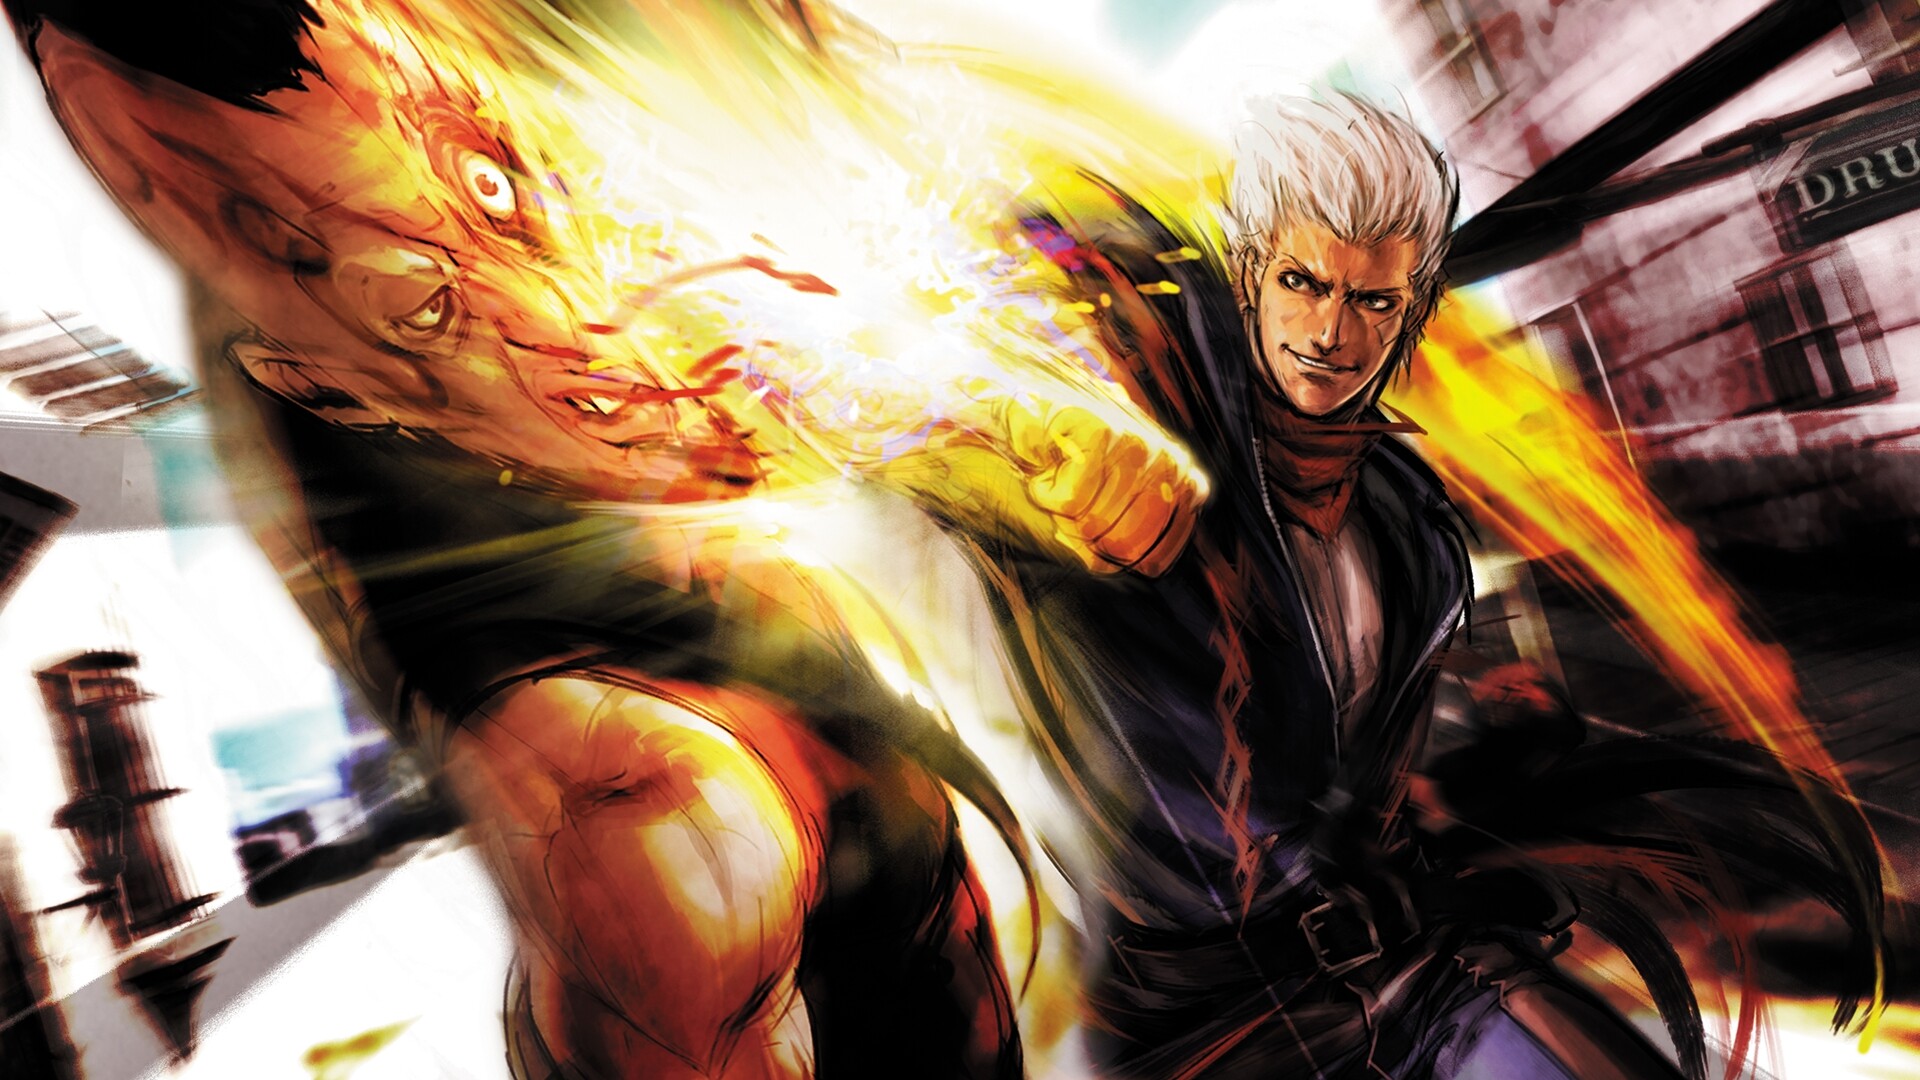 God Hand (Game): Gene, The main protagonist, A character whose strongest move is the Invincible Fist. 1920x1080 Full HD Background.